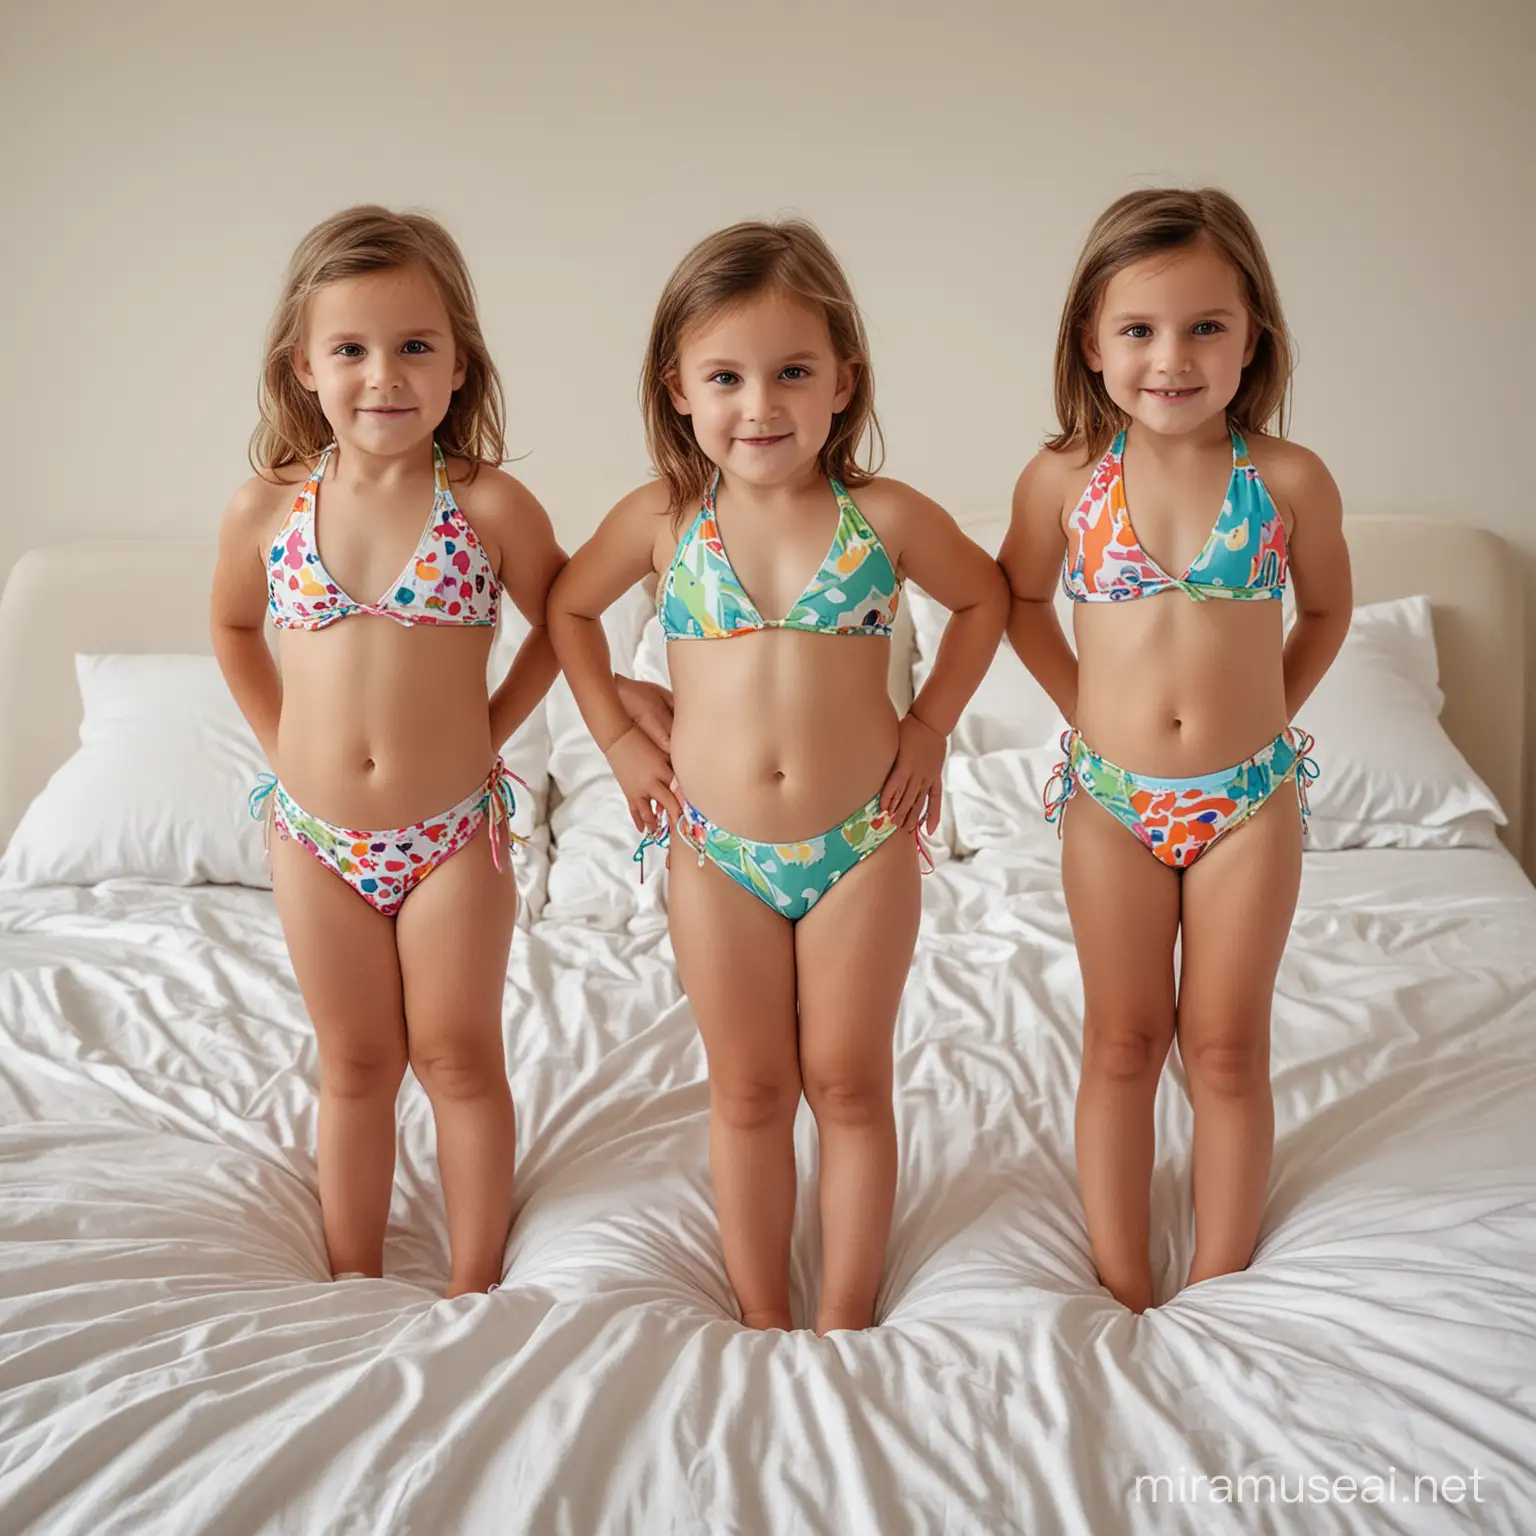 Playful Young Children in Colorful Bikini Bottoms on a Bed